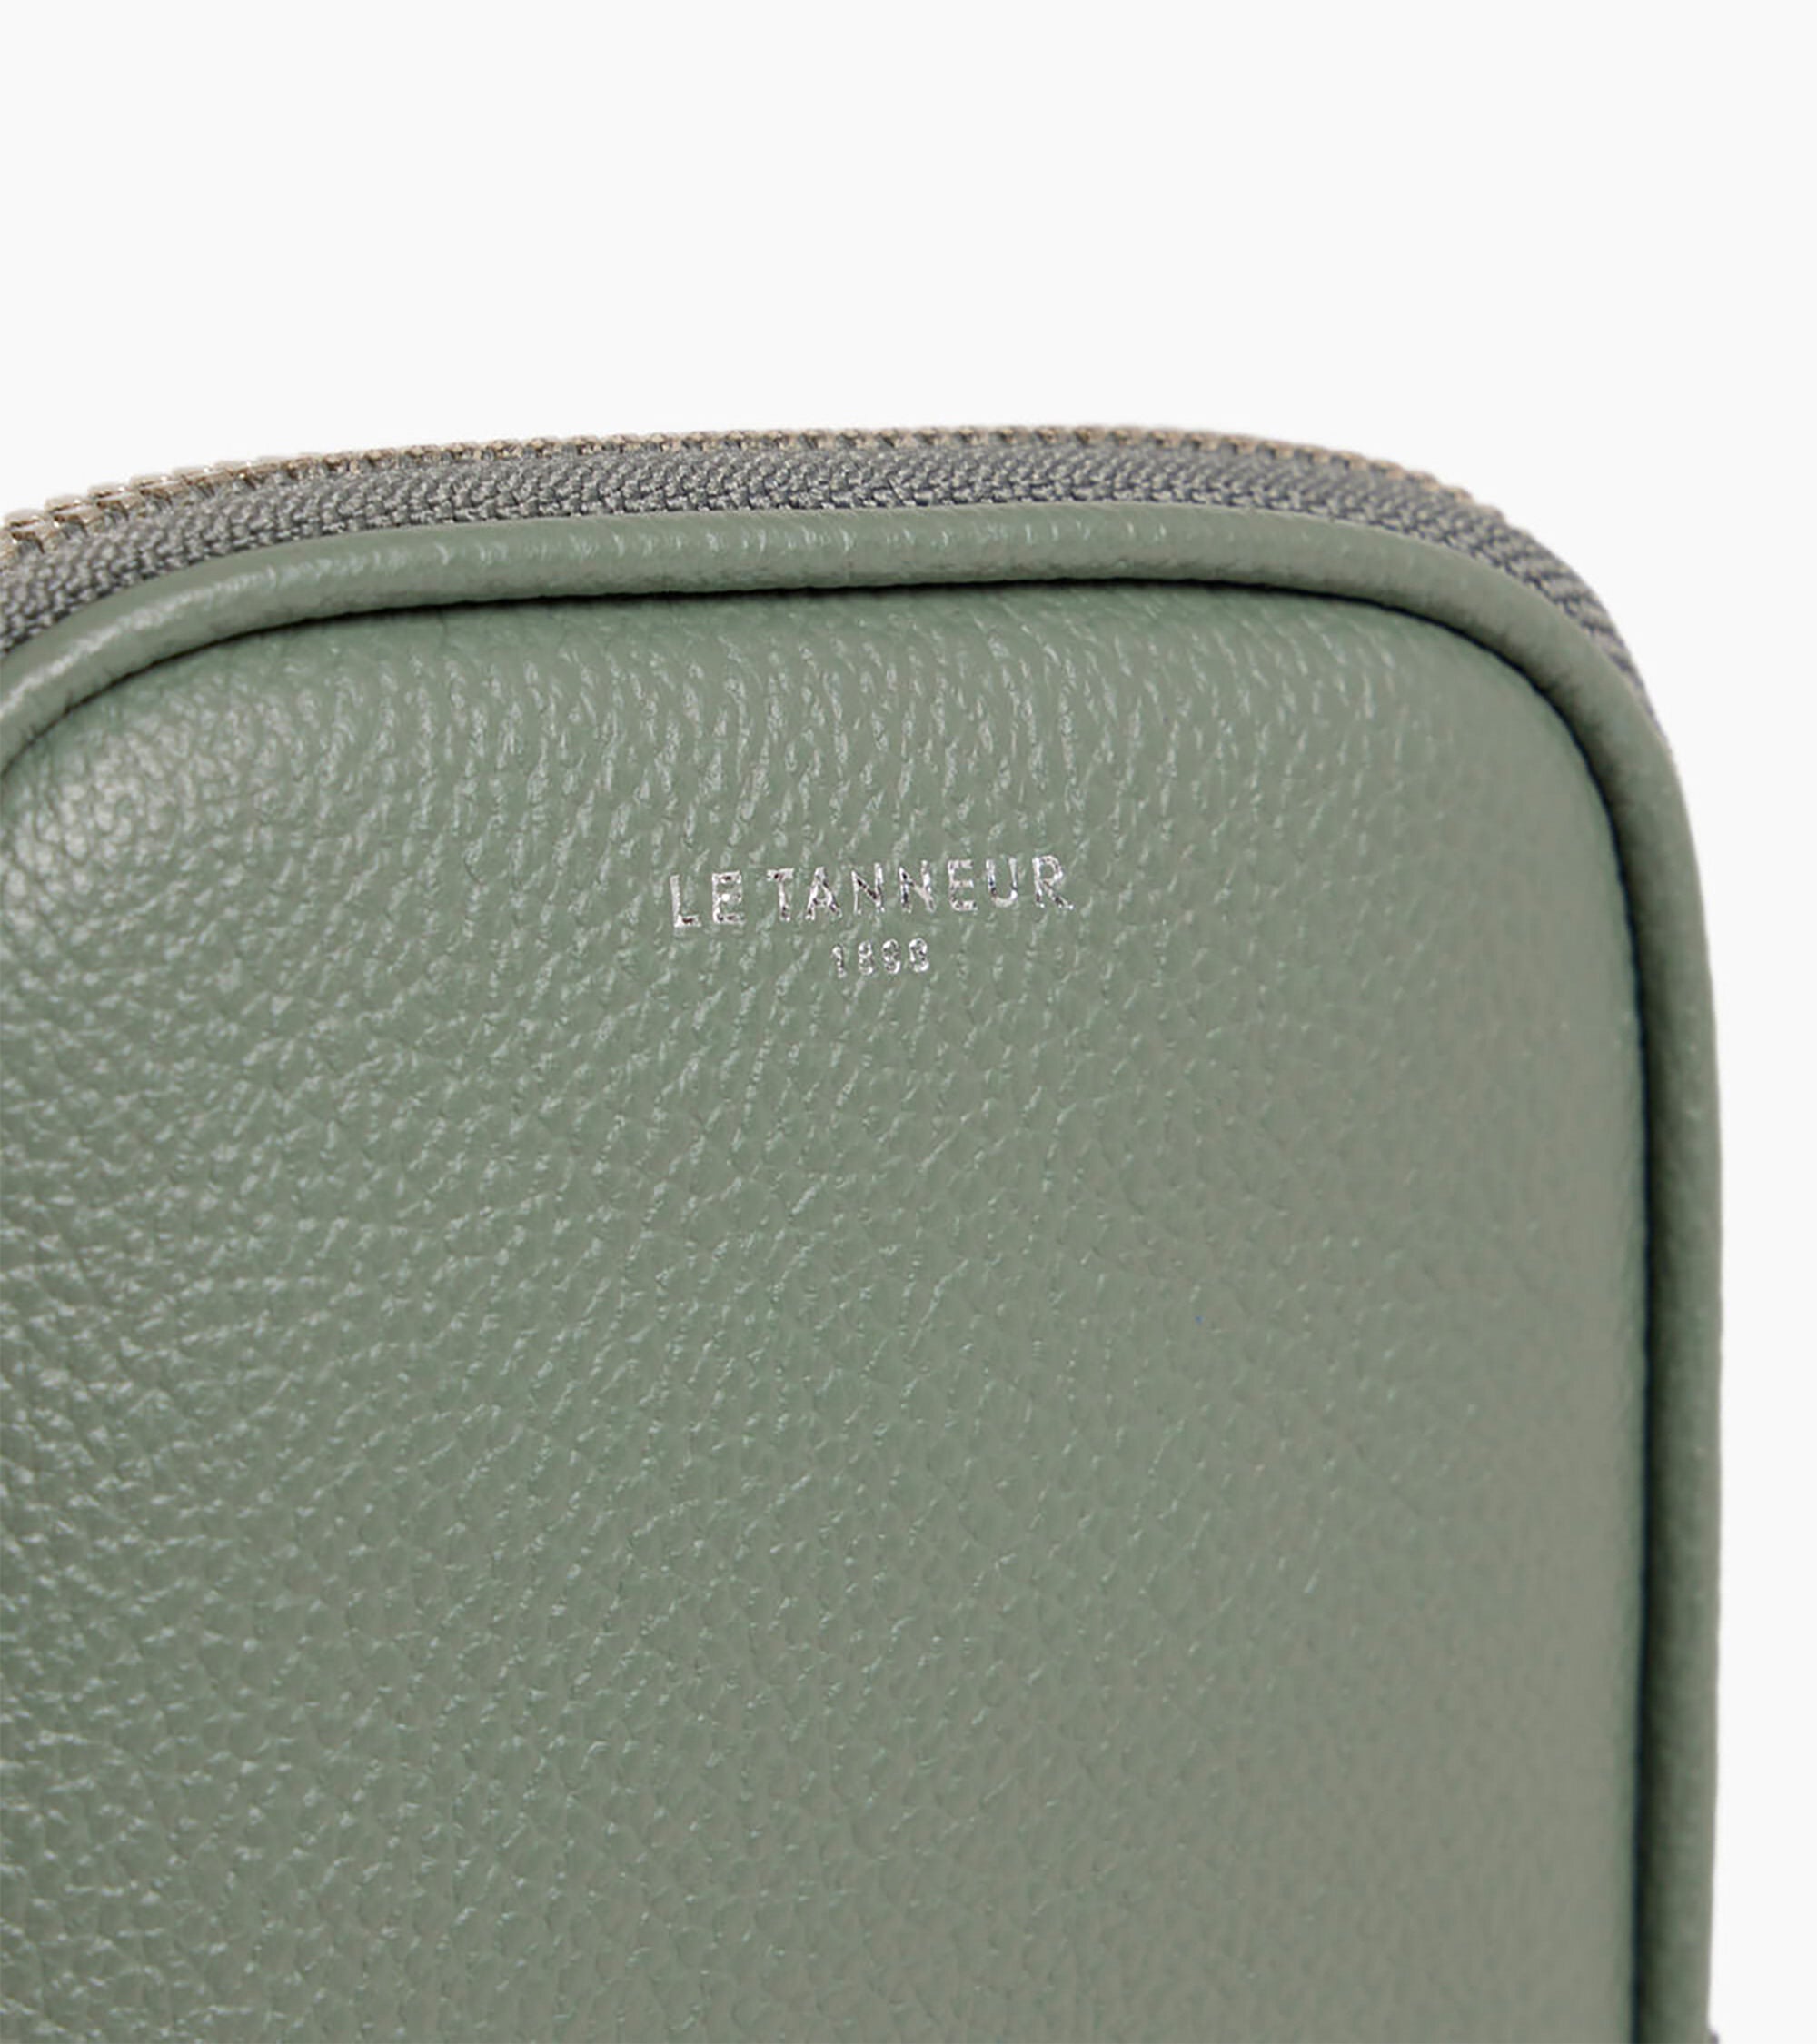 Emile phone case in pebbled leather